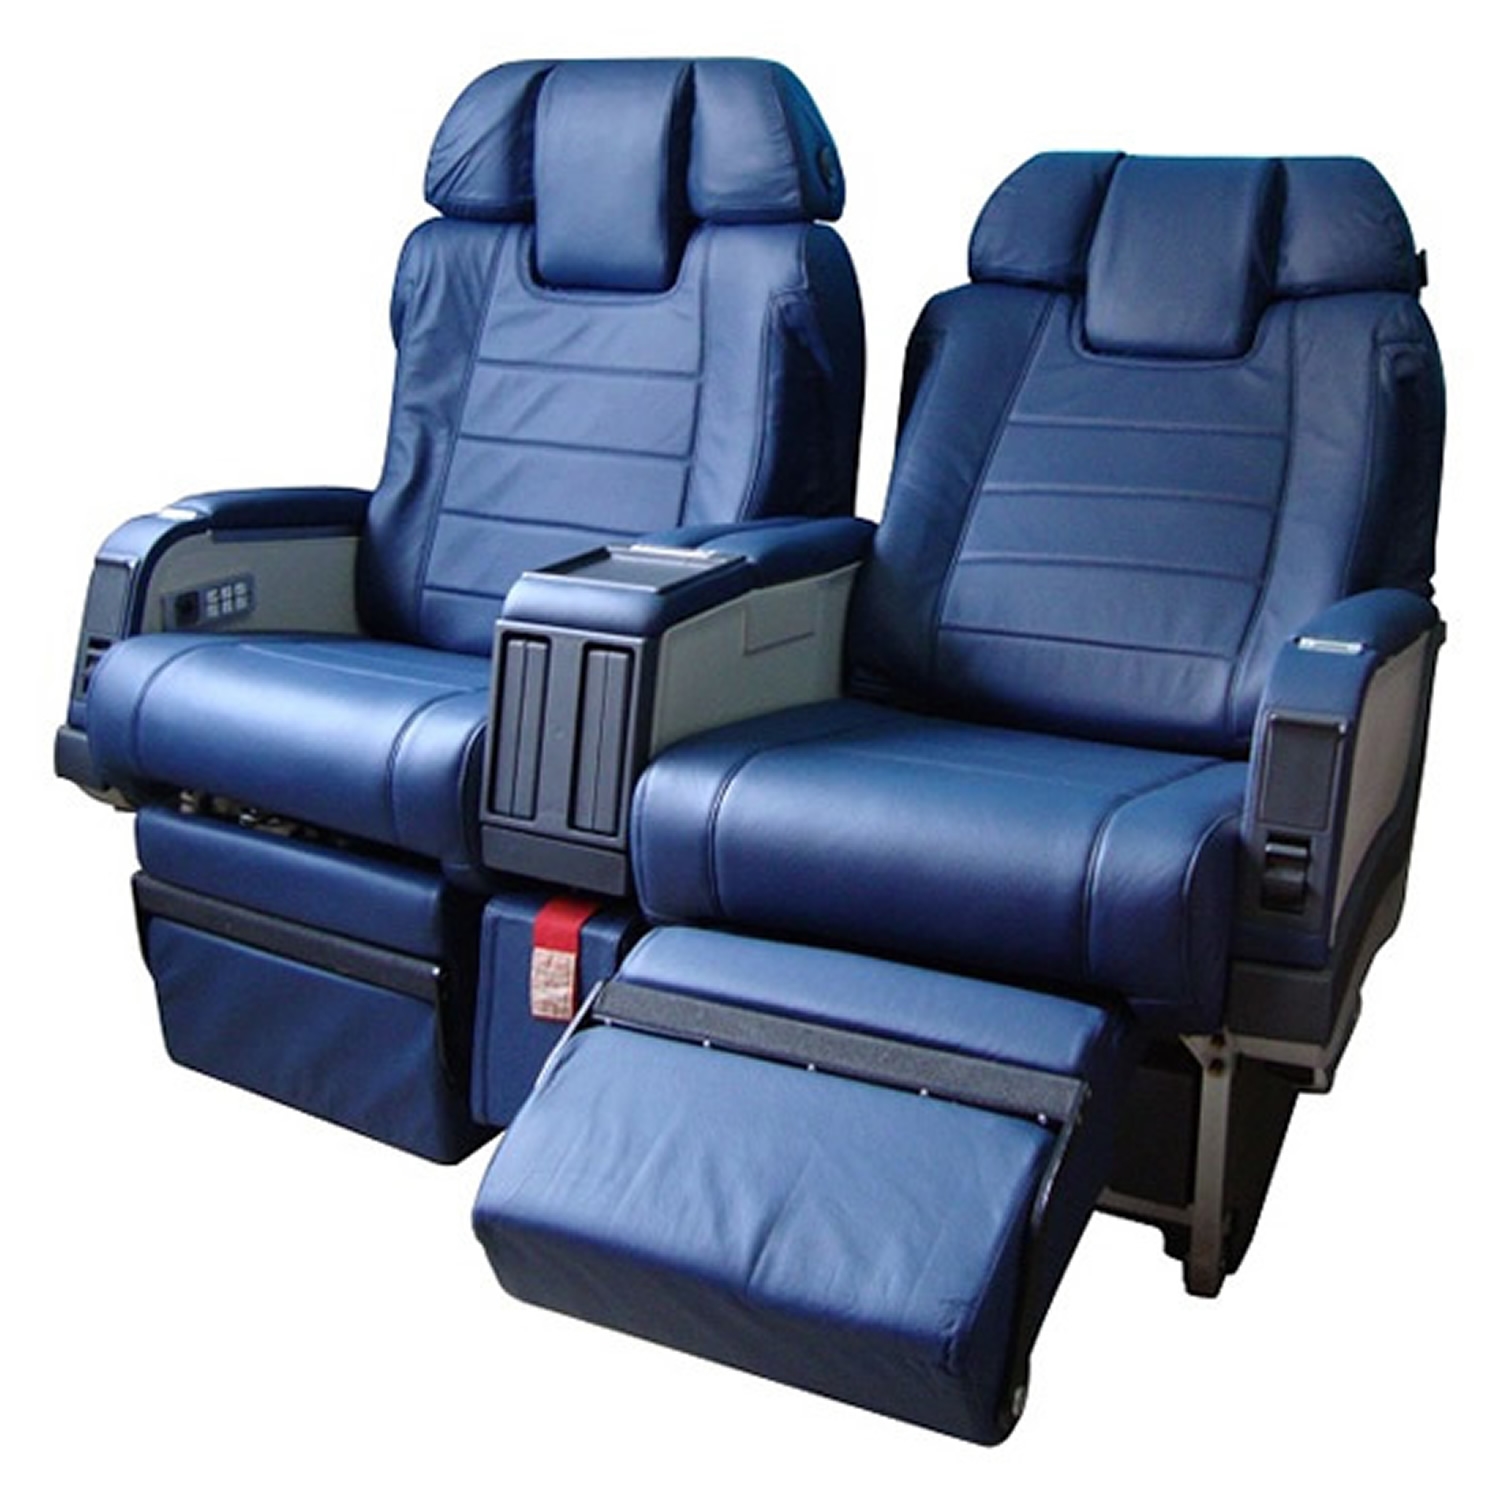 Skyline First Class - Leather Electronic